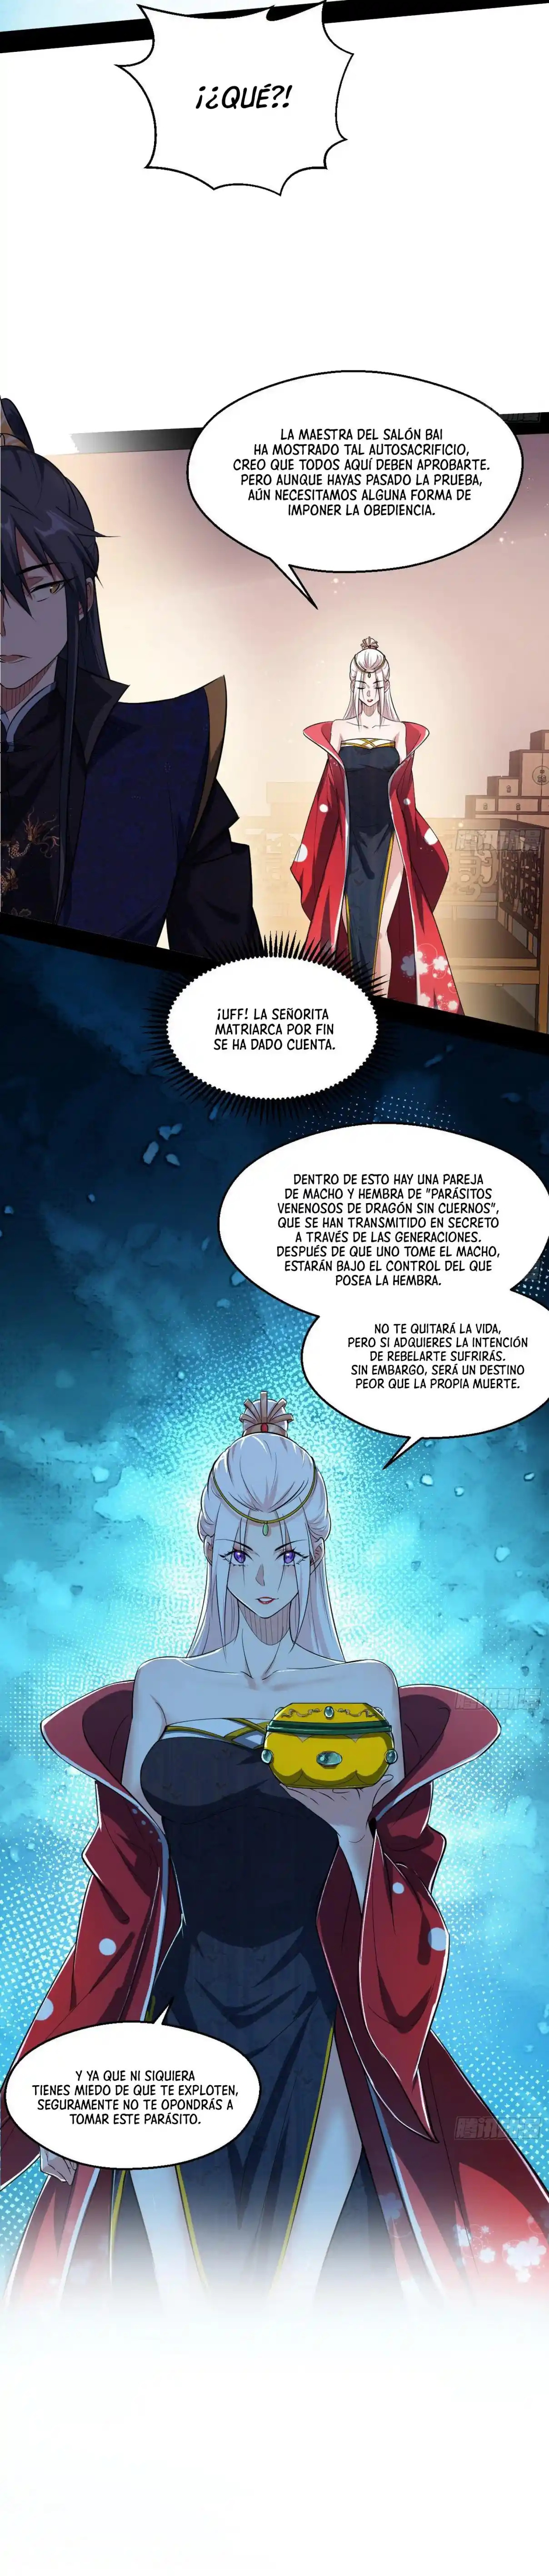 Manga Soy un dios maligno Chapter 88 image number 3